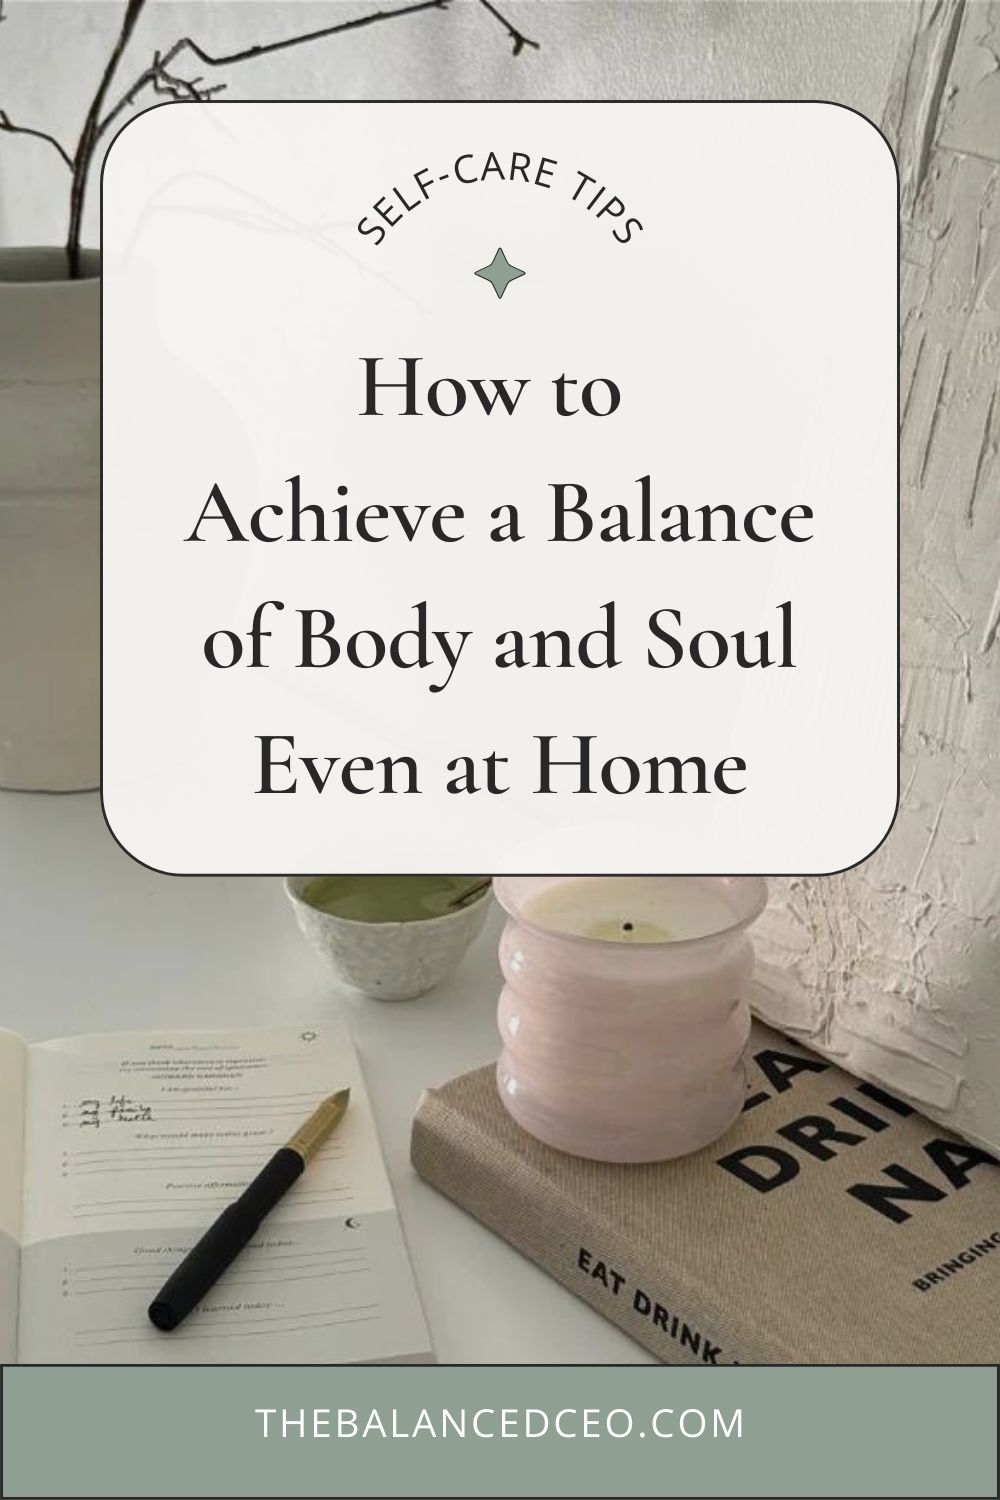 How to Achieve a Balance of Body and Soul Even at Home